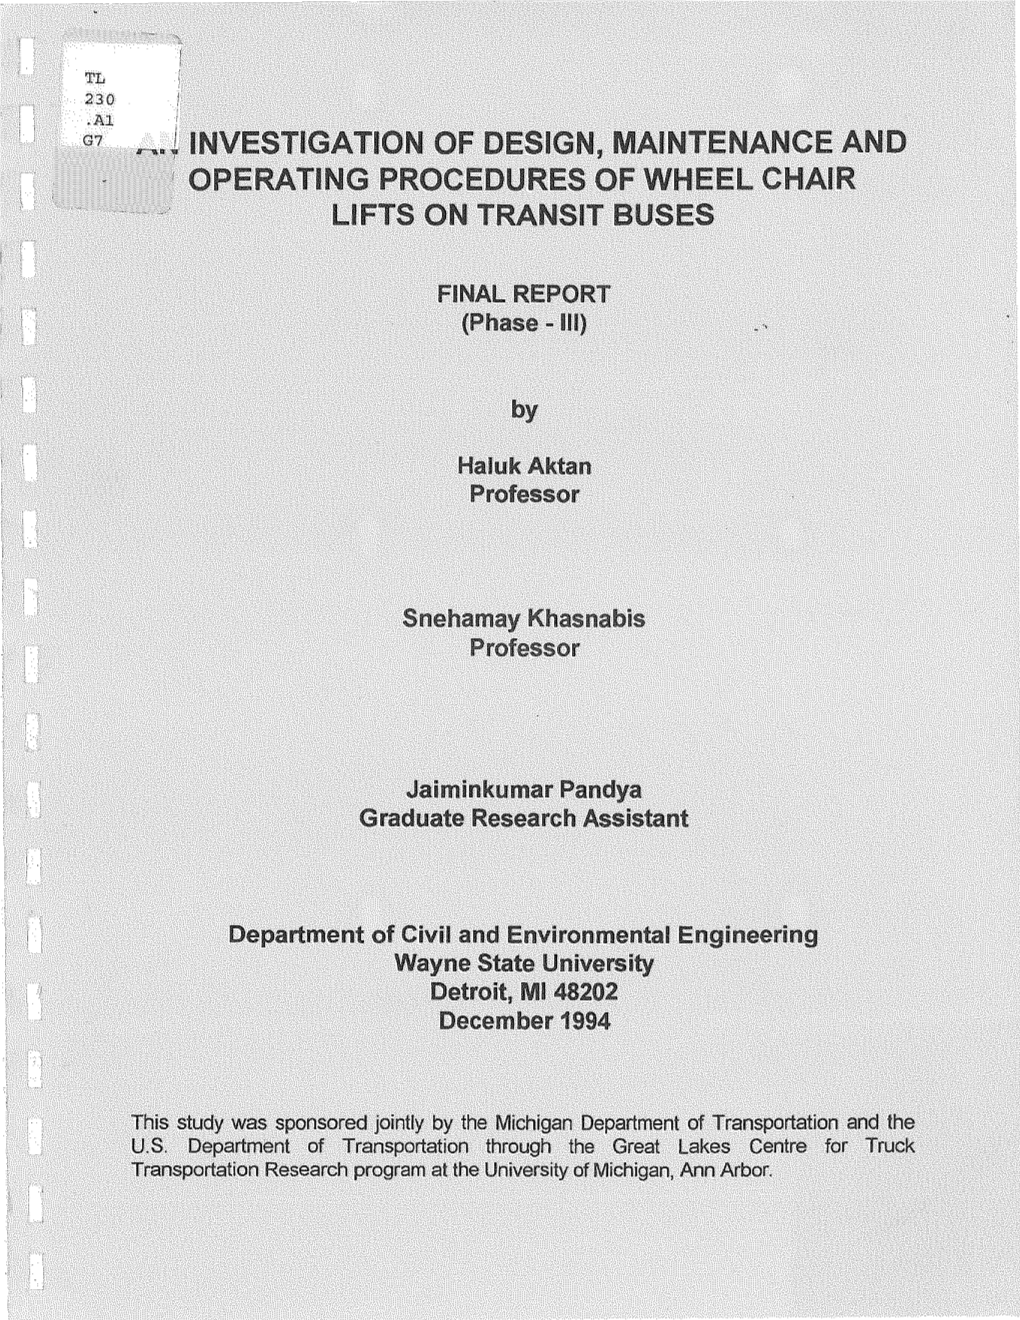 Operating Procedures of Wheel Chair Lifts on Transit Buses